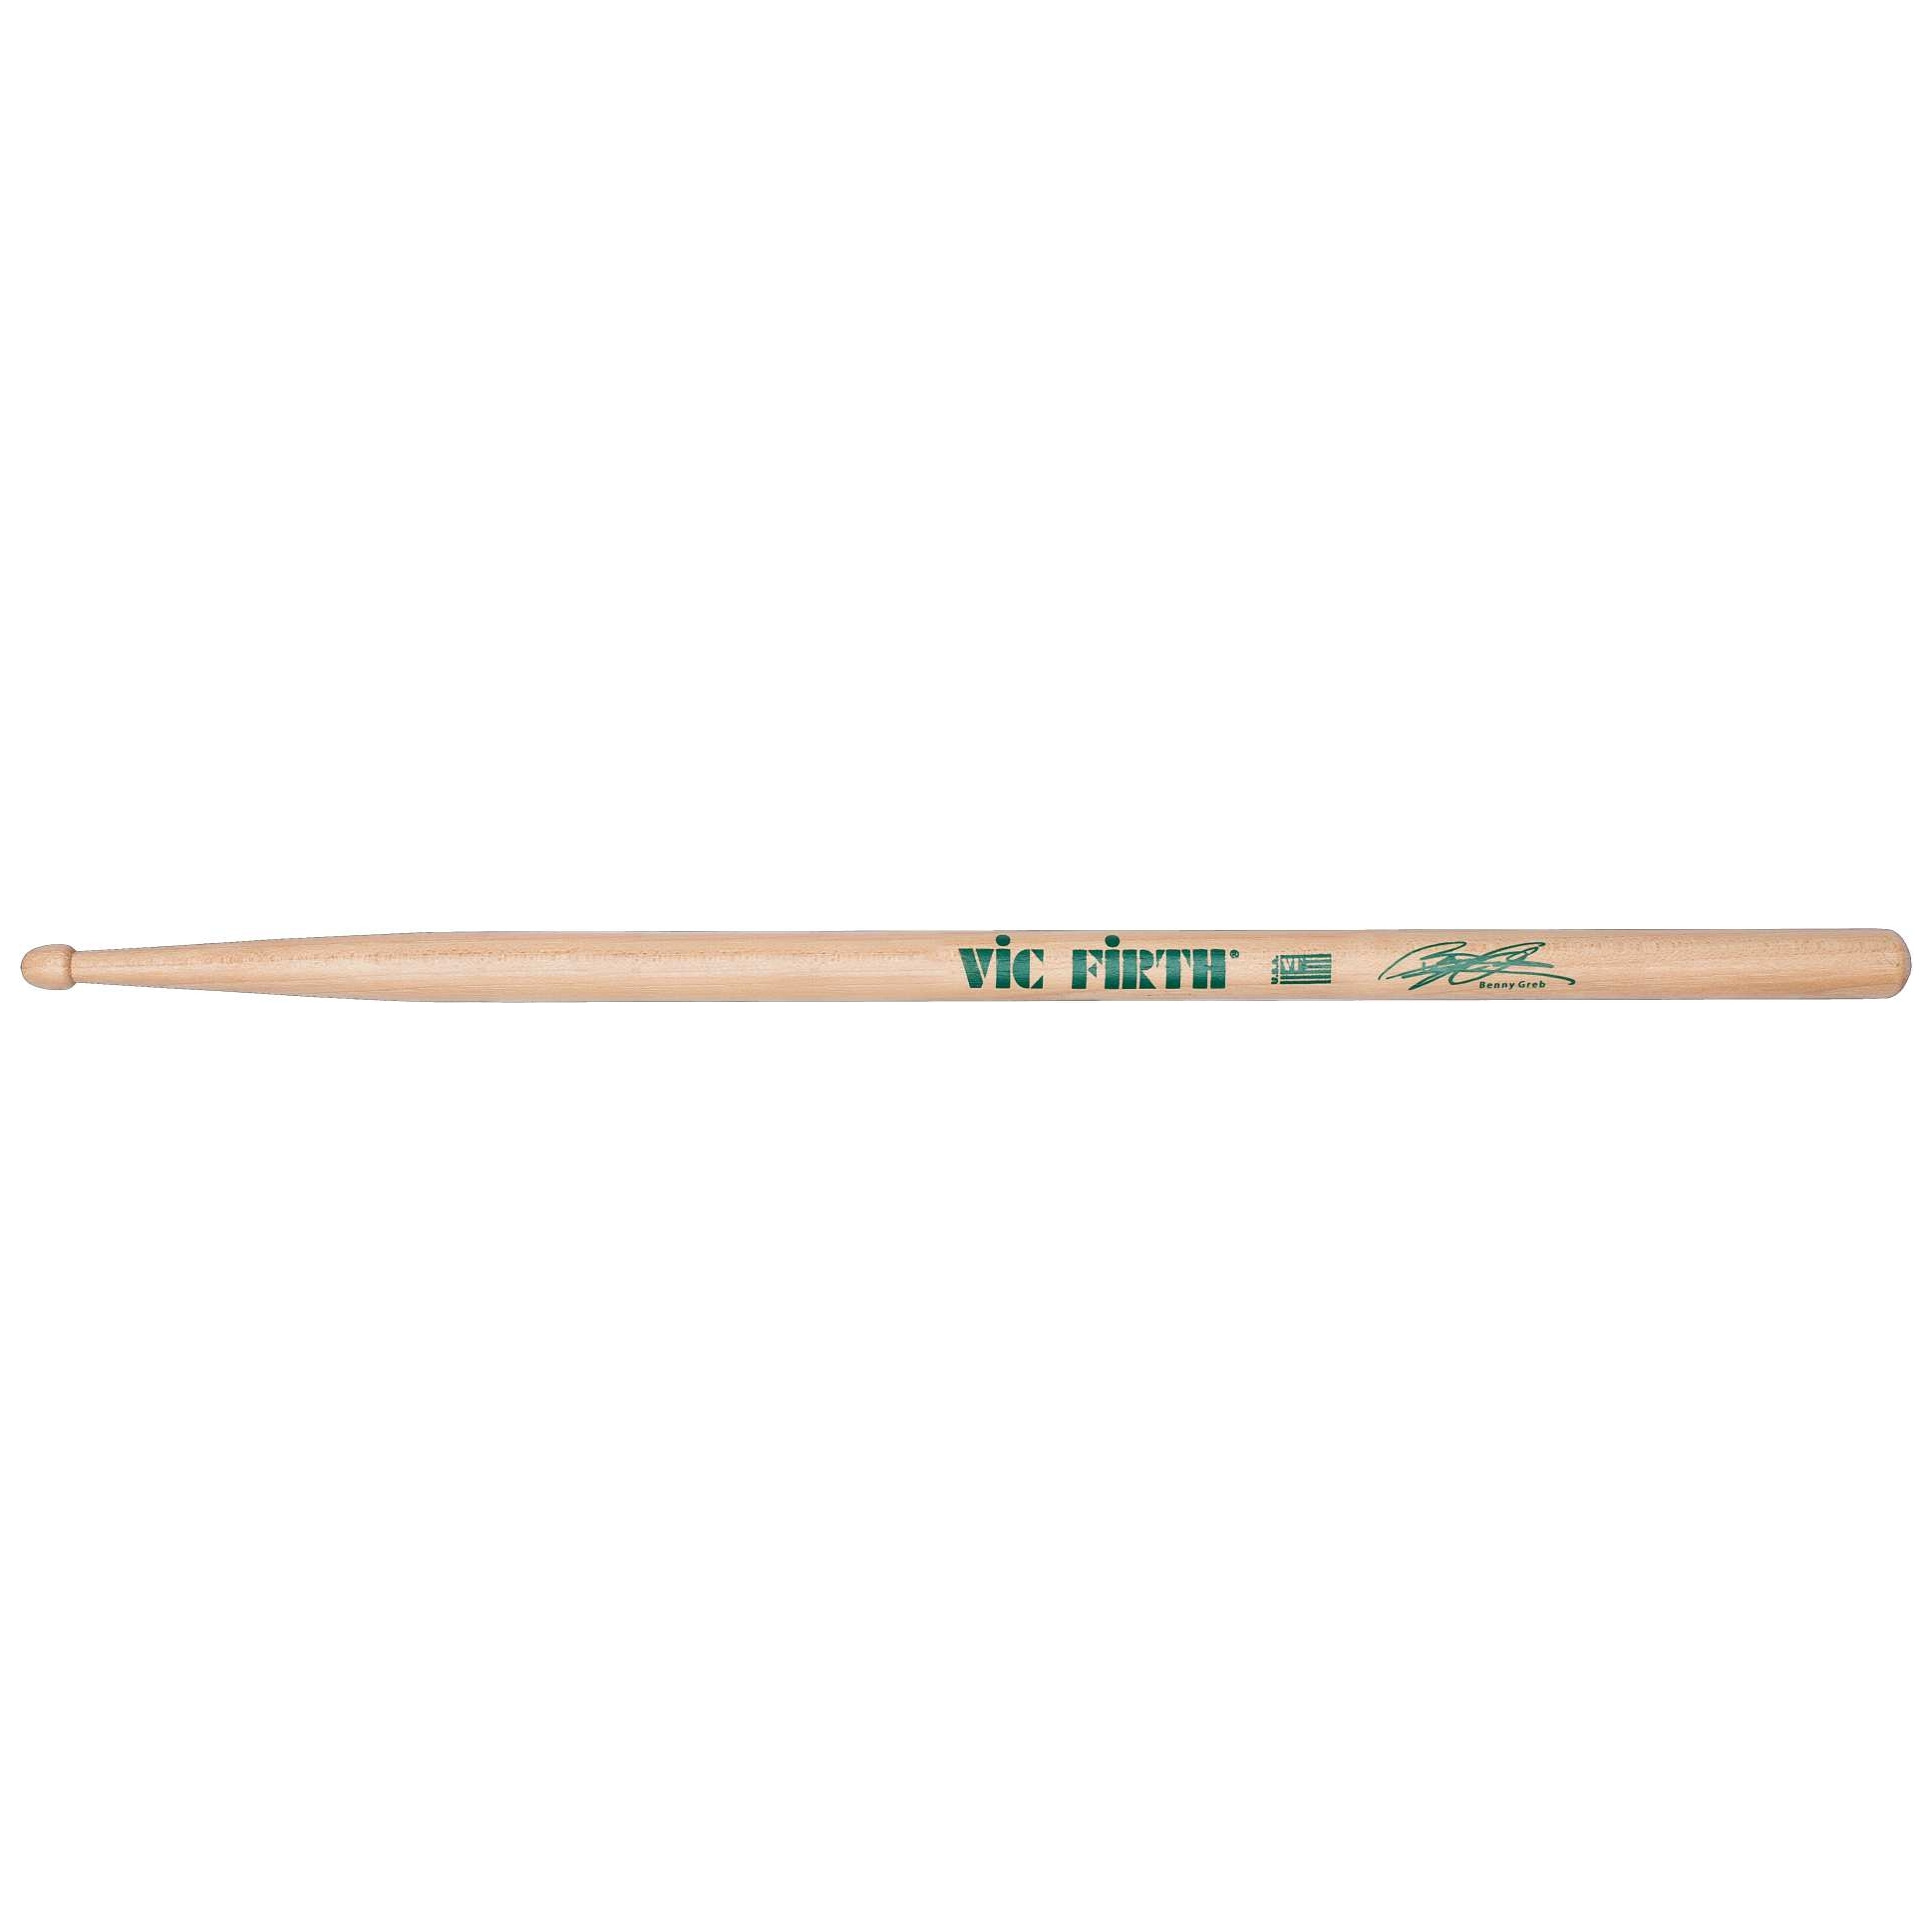 Vic Firth Benny Greb Signature series - Hickory - Wood tip shape